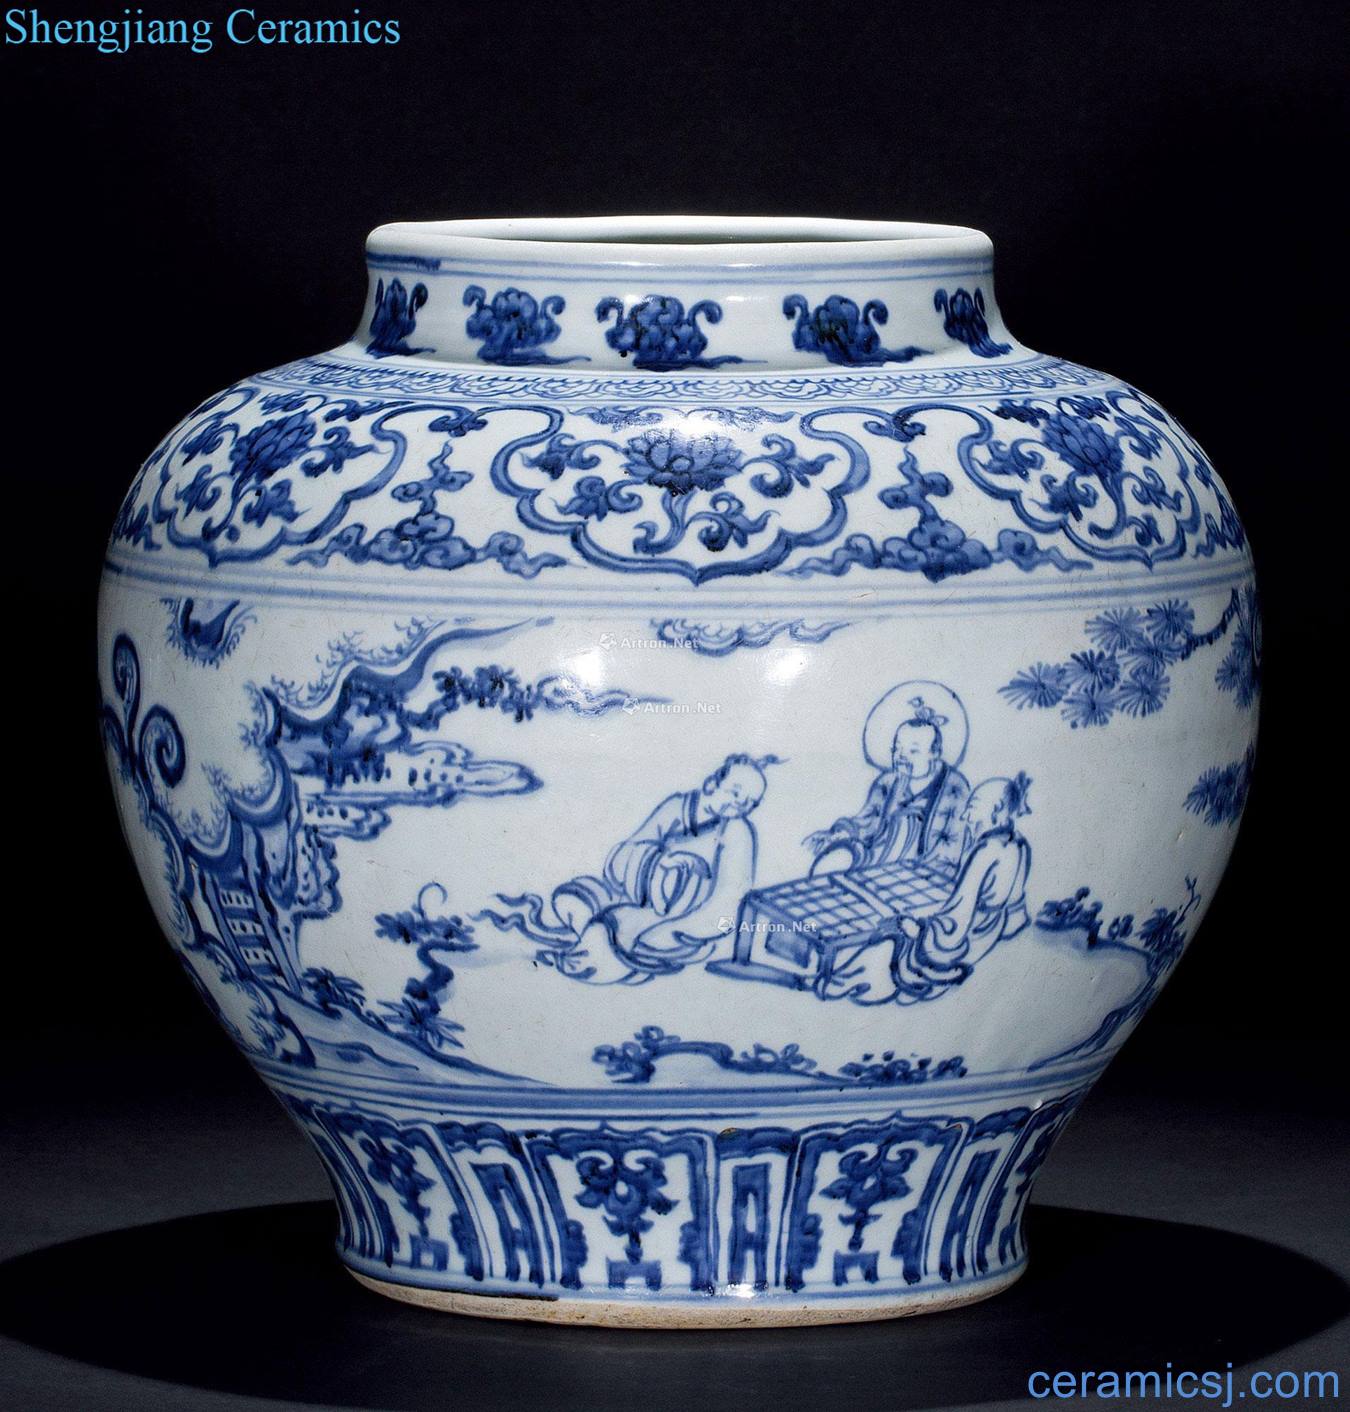 Ming Stories of blue and white figure cans